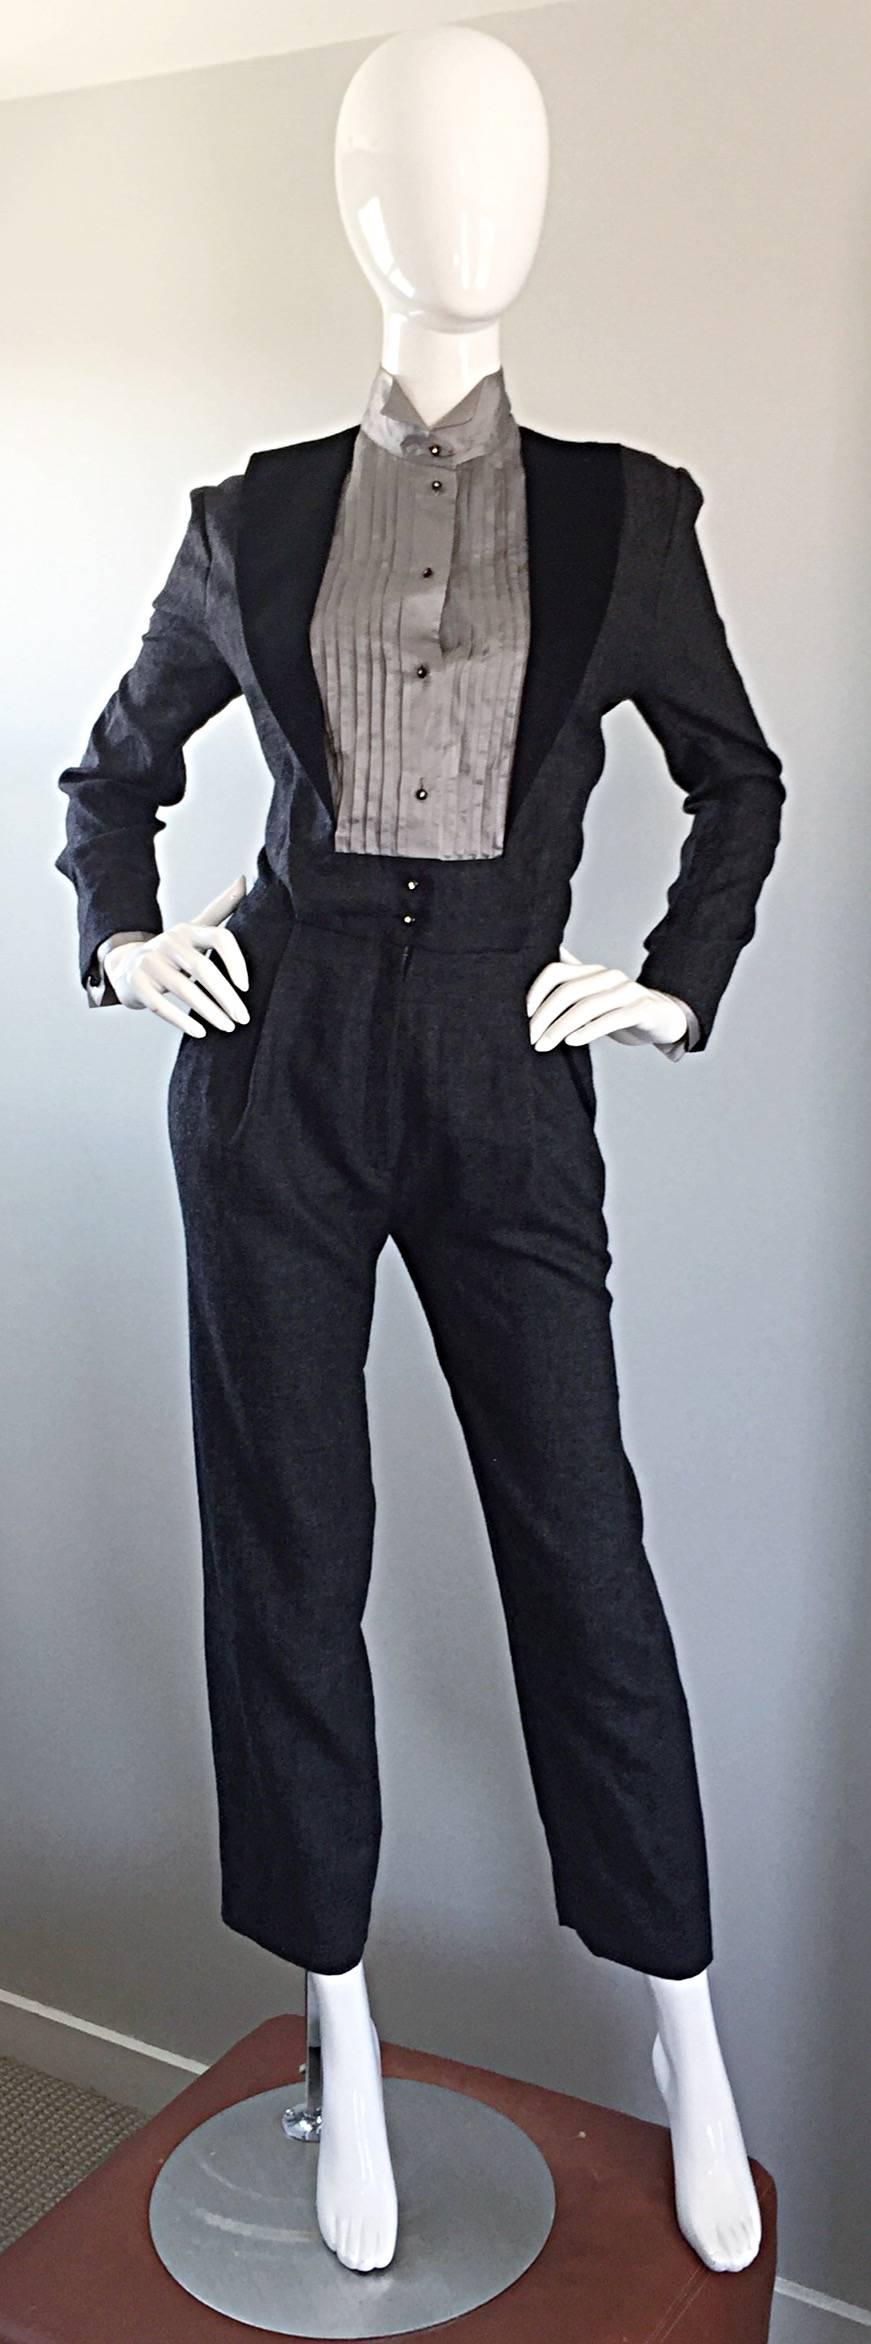 Incredible and rare early 80s vintage ALBERTA FERRETTI charcoal gray jumpsuit, from one of Ferretti's first collections! Lightweight soft gray wool, with an attached light gray silk tuxedo shirt. Wonderful flattering fit, with art eye to the